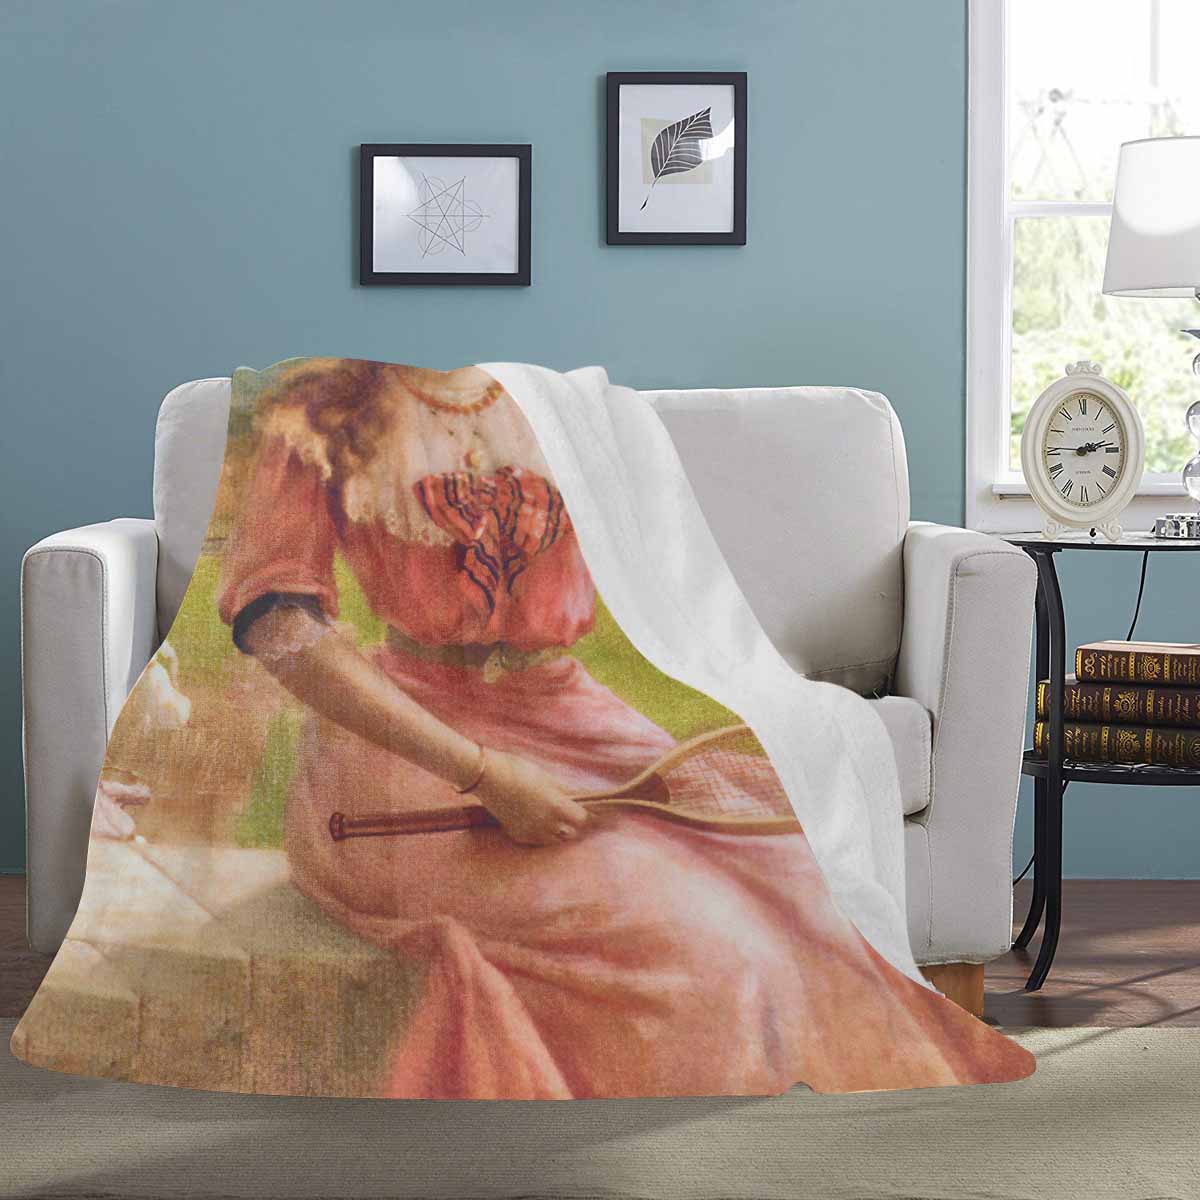 Victorian Lady Design BLANKET, LARGE 60 in x 80 in, Tennis Anyone